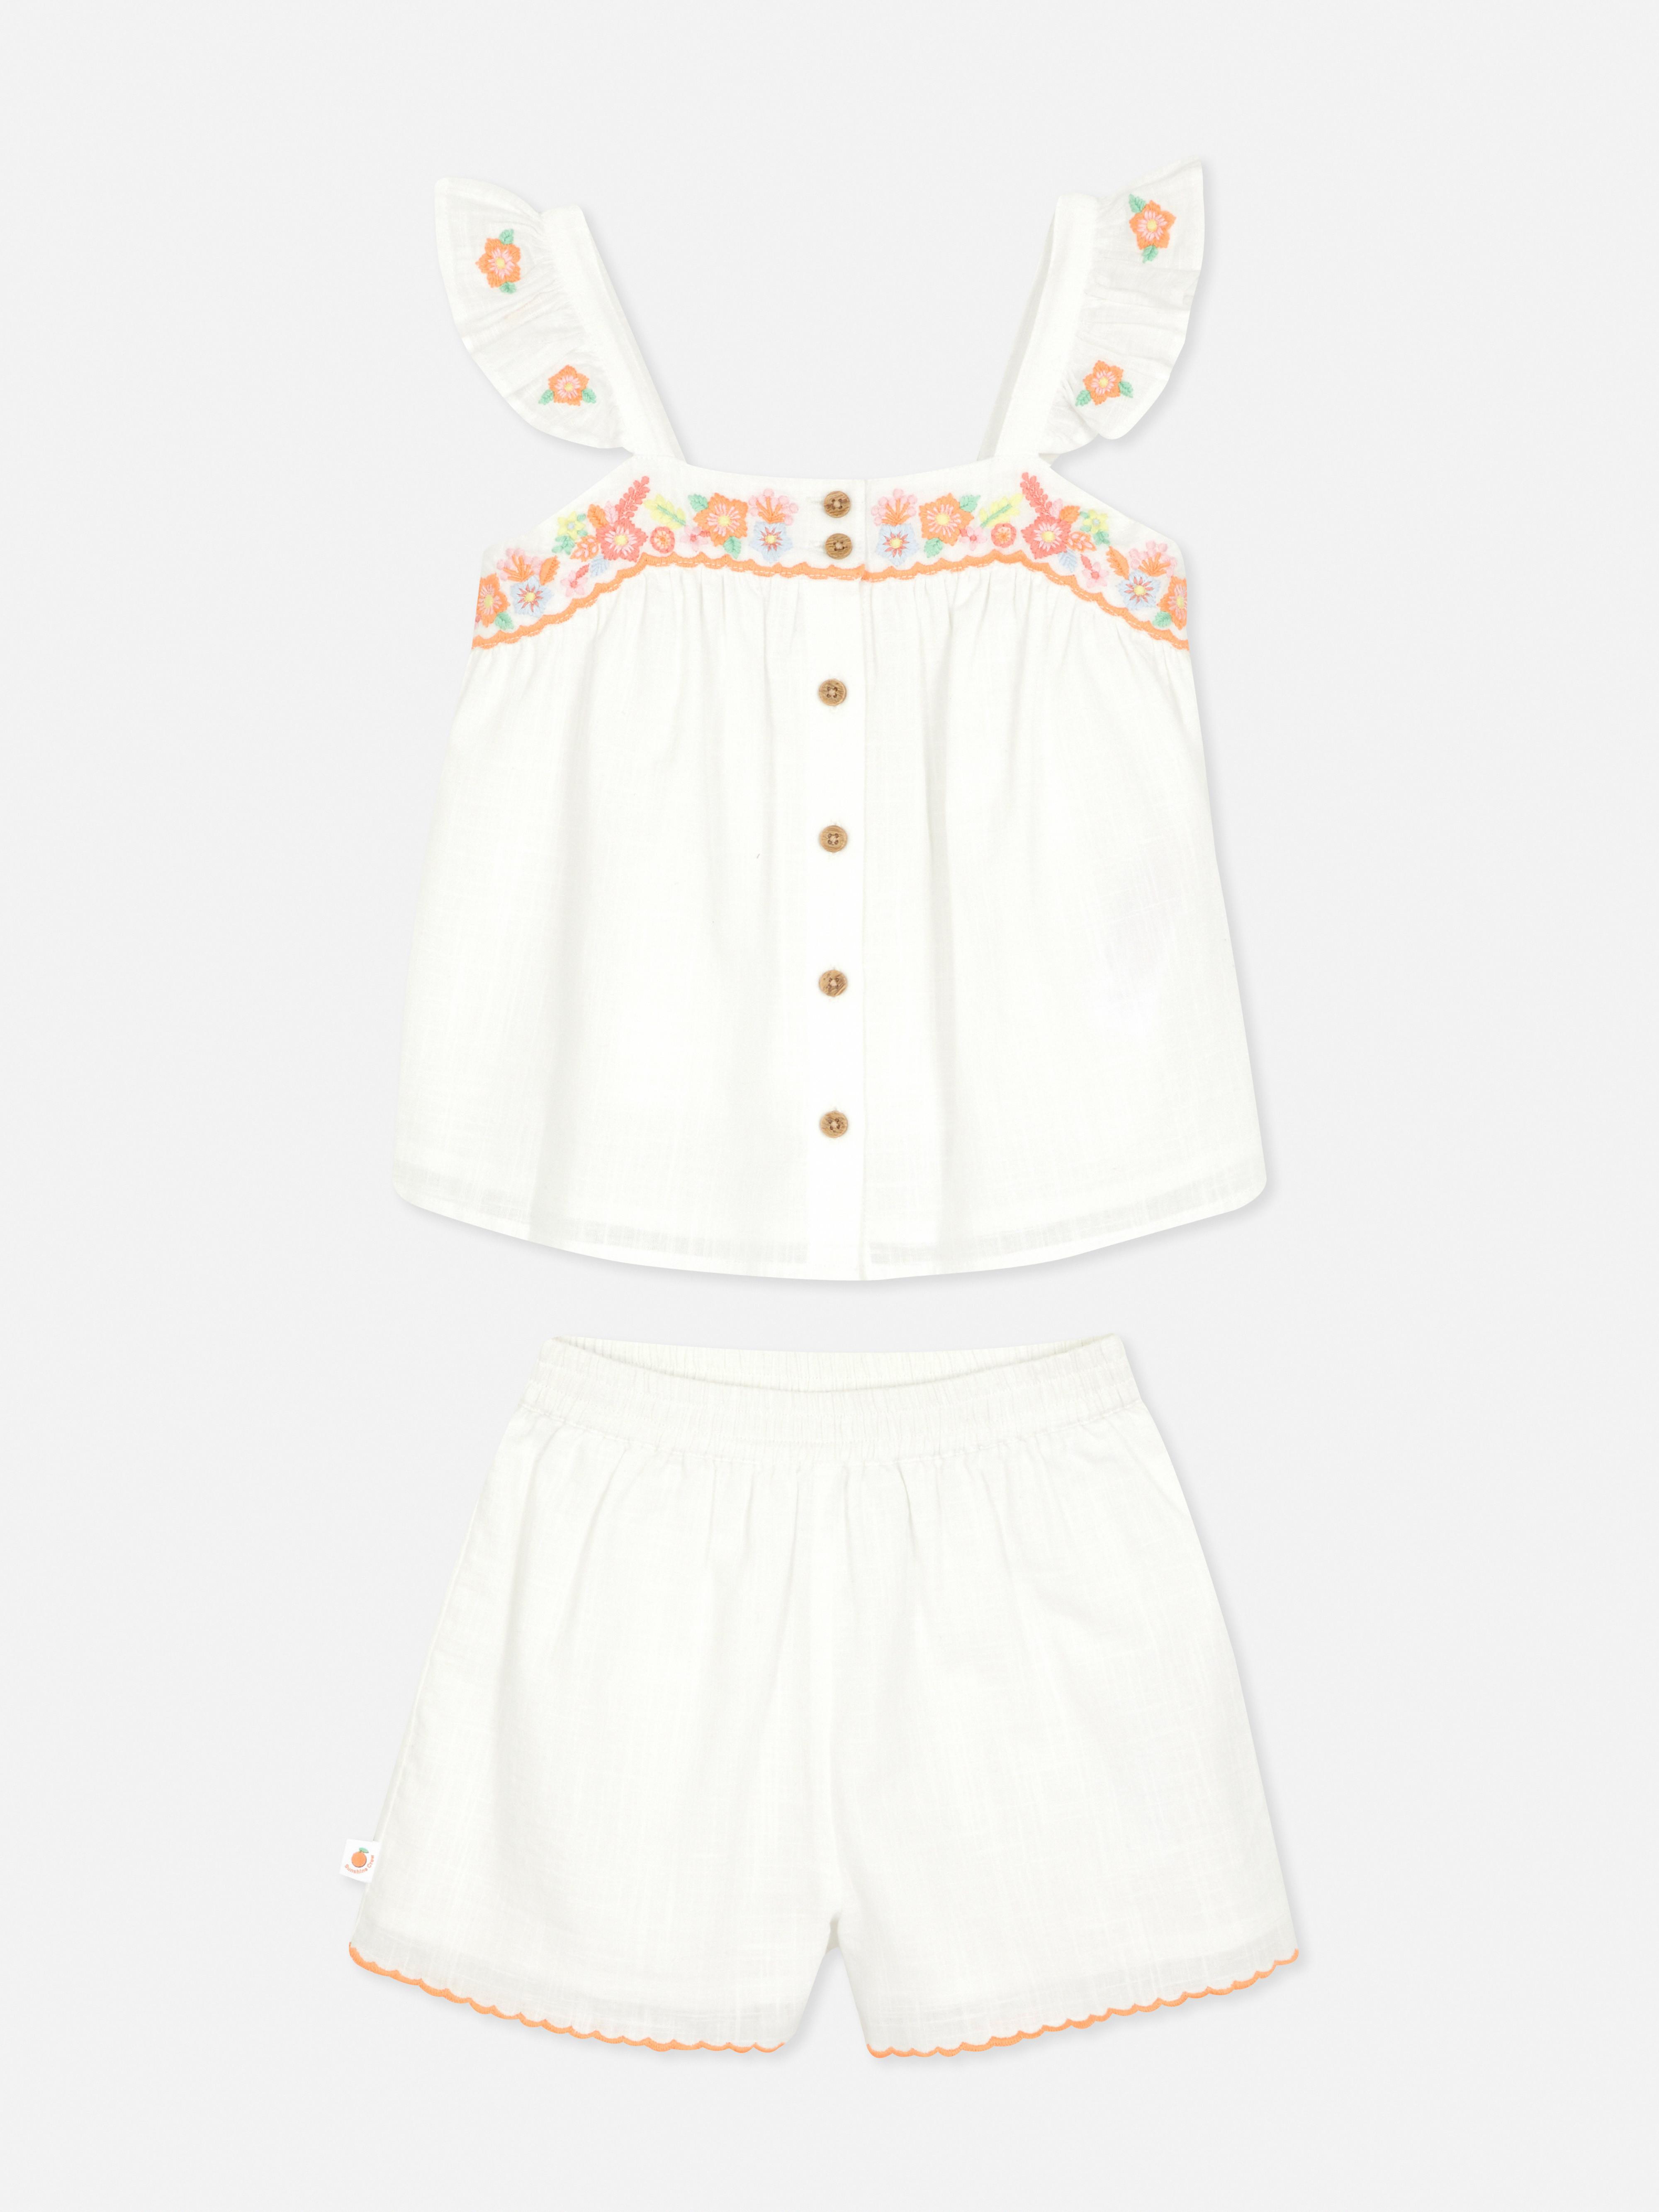 Stacey Solomon Floral Embroidered Blouse and Shorts Set